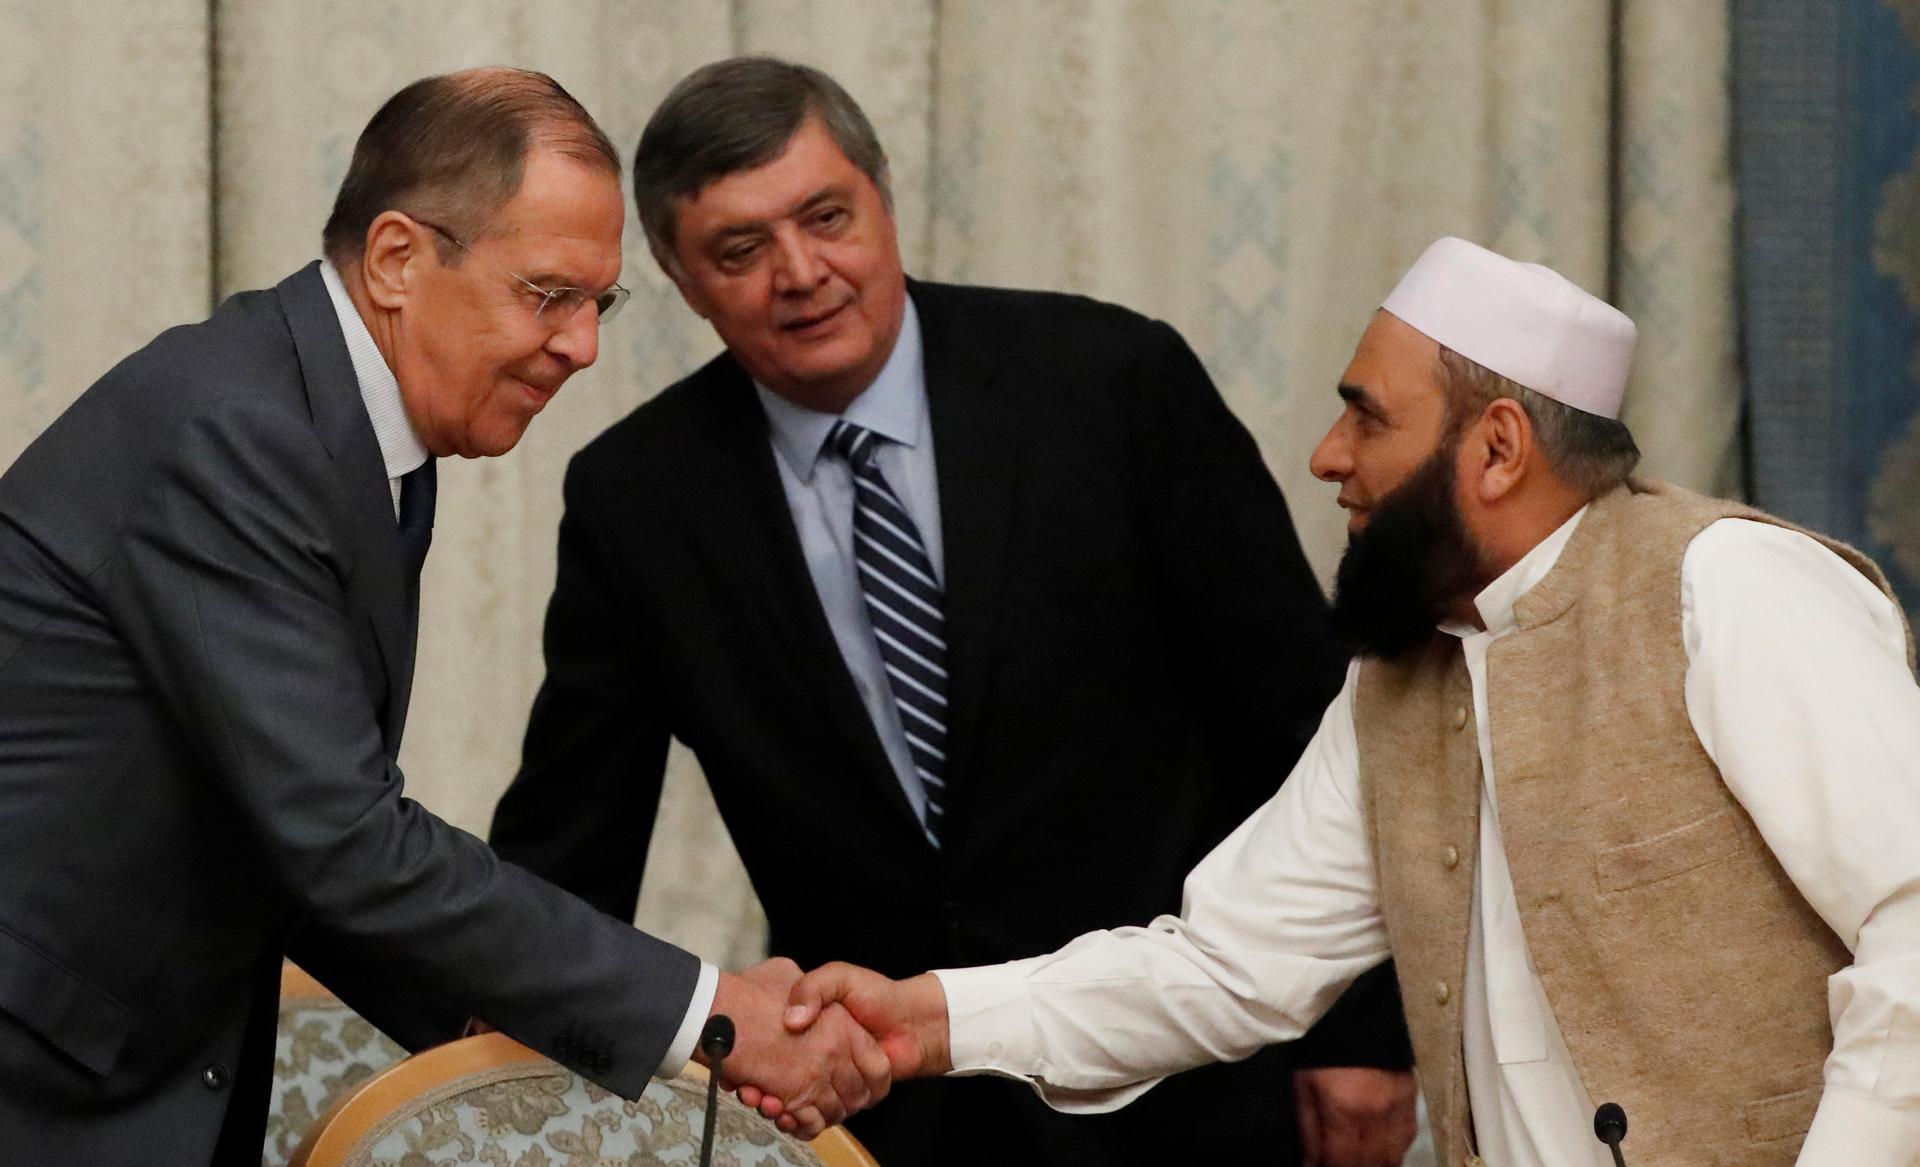 Russian Foreign Minister Sergei Lavrov welcomes member of Taliban delegation Alhaj Mohammad Sohail Shaina during the multilateral peace talks on Afghanistan in Moscow, Russia November 9, 2018.